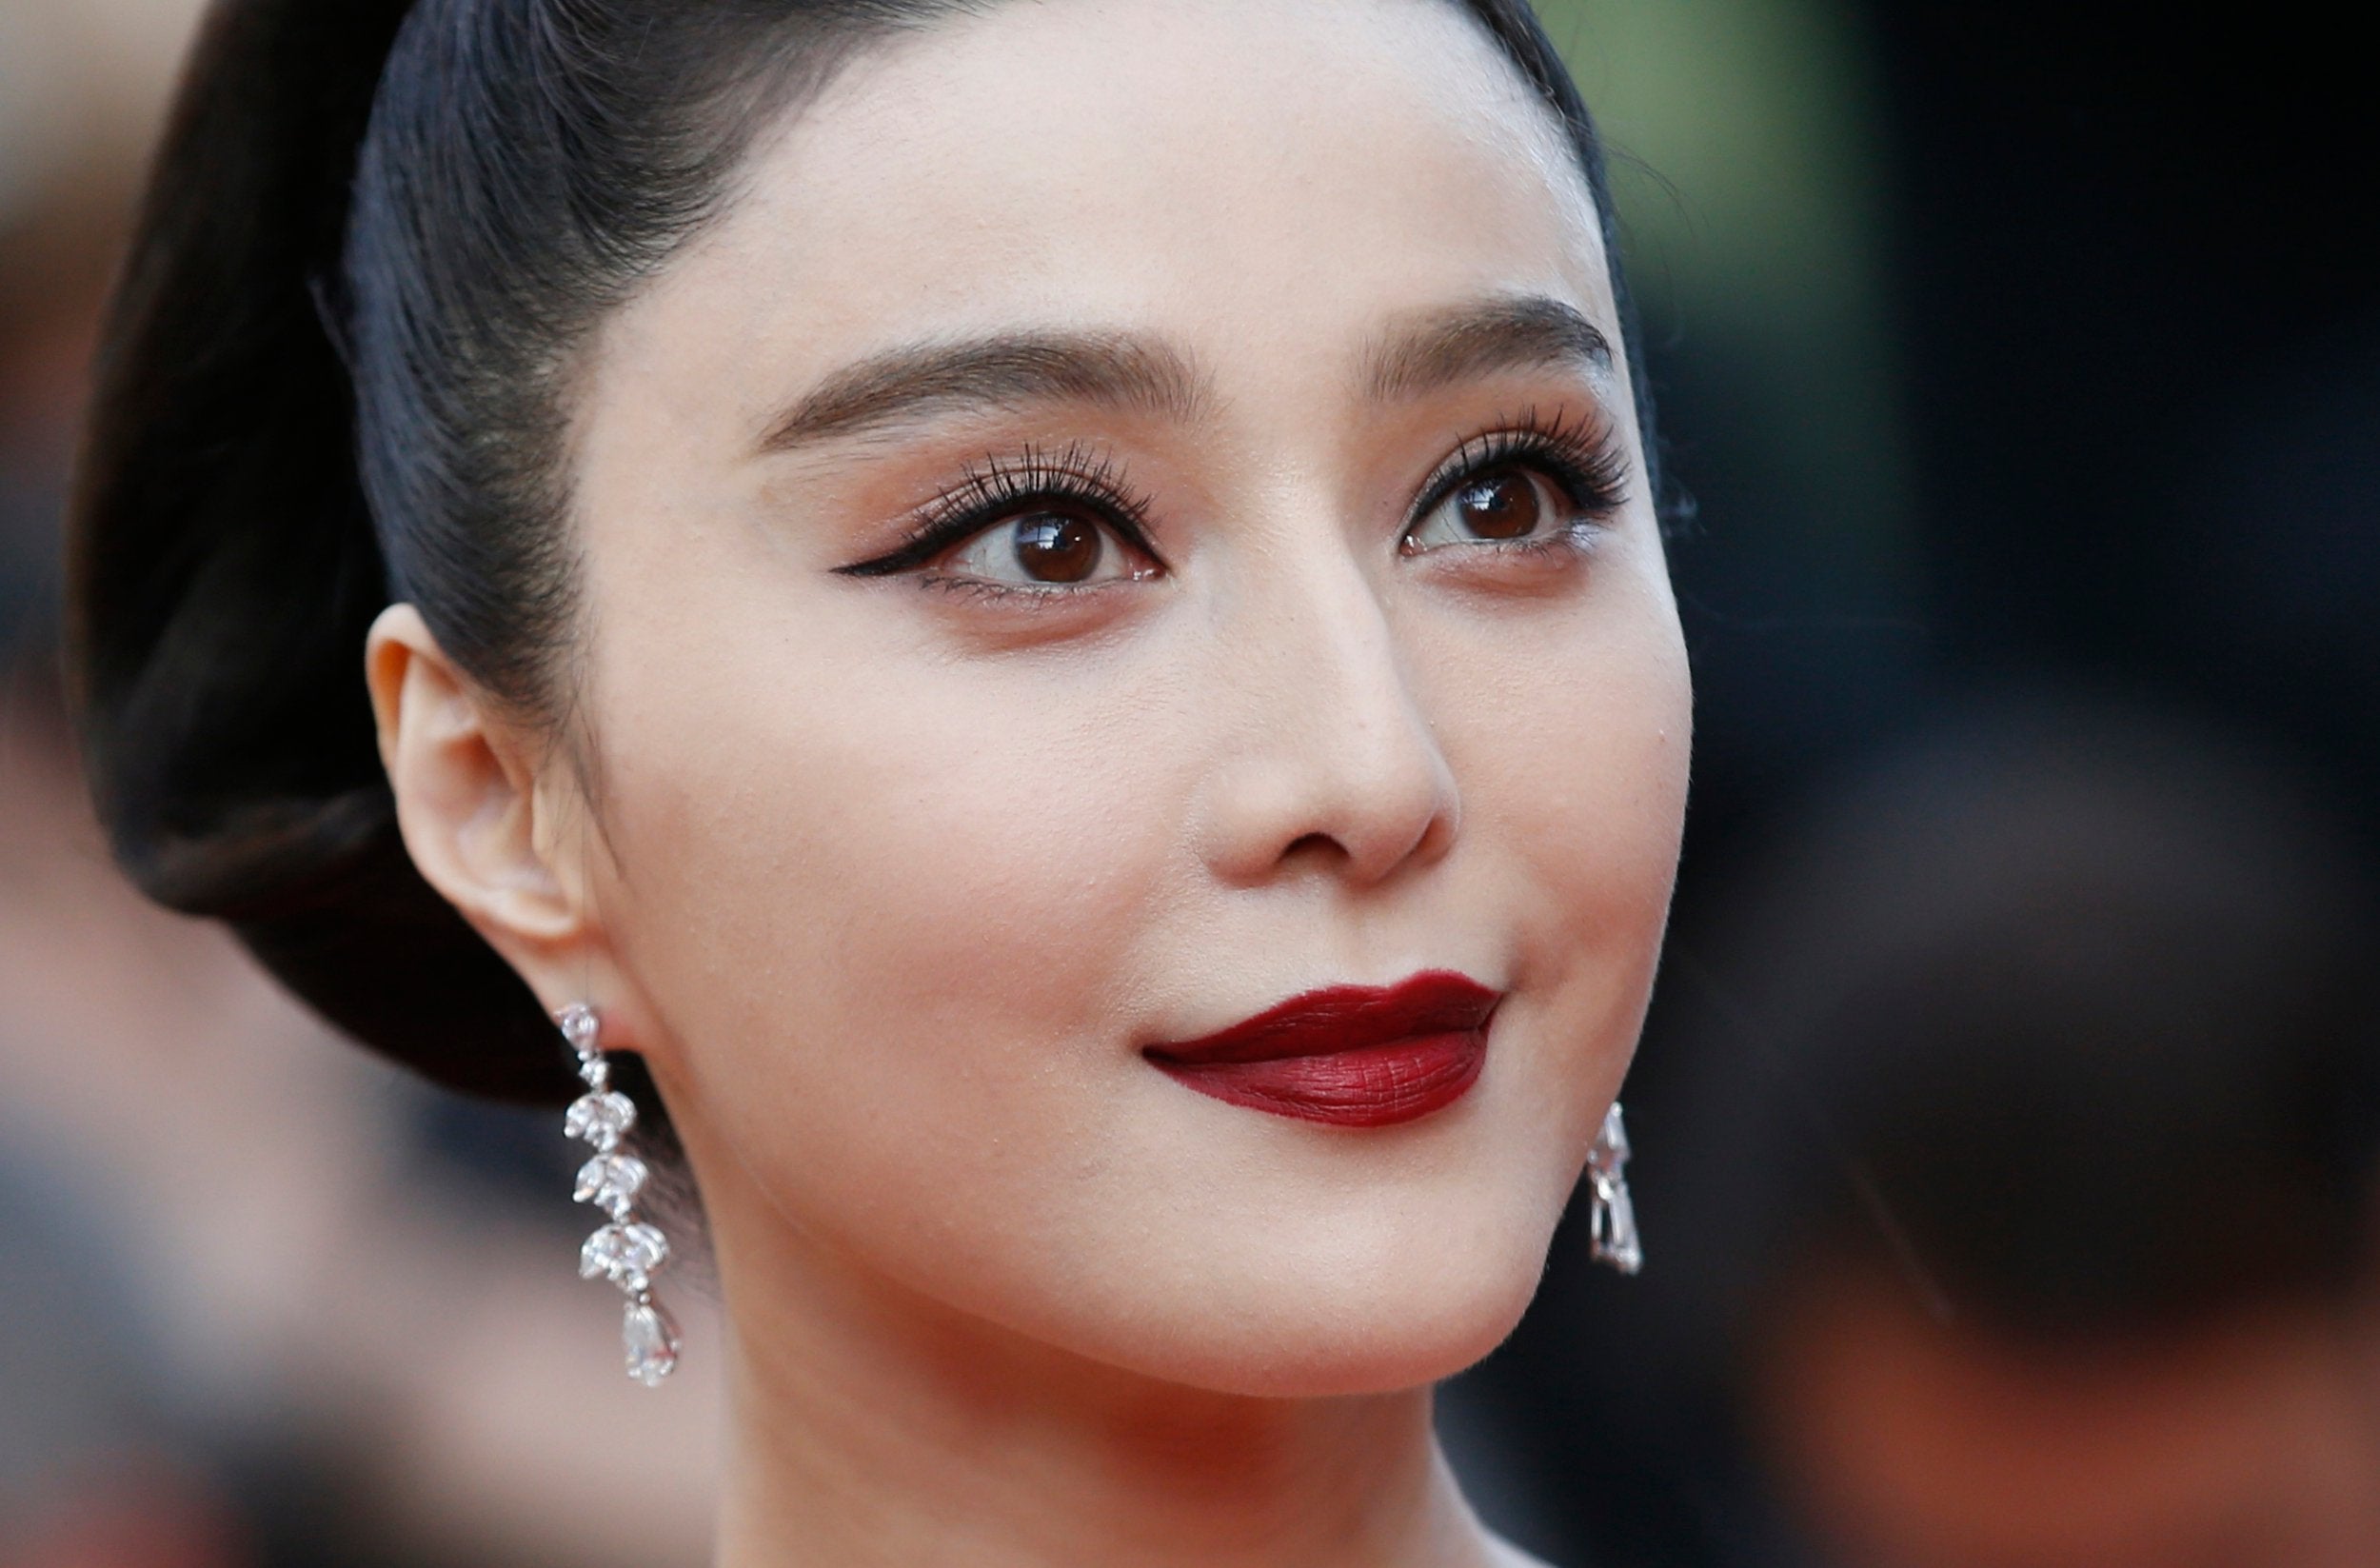 Fan Bingbing 'missing': Silence from Chinese actress concerns fans | The Independent | Independent